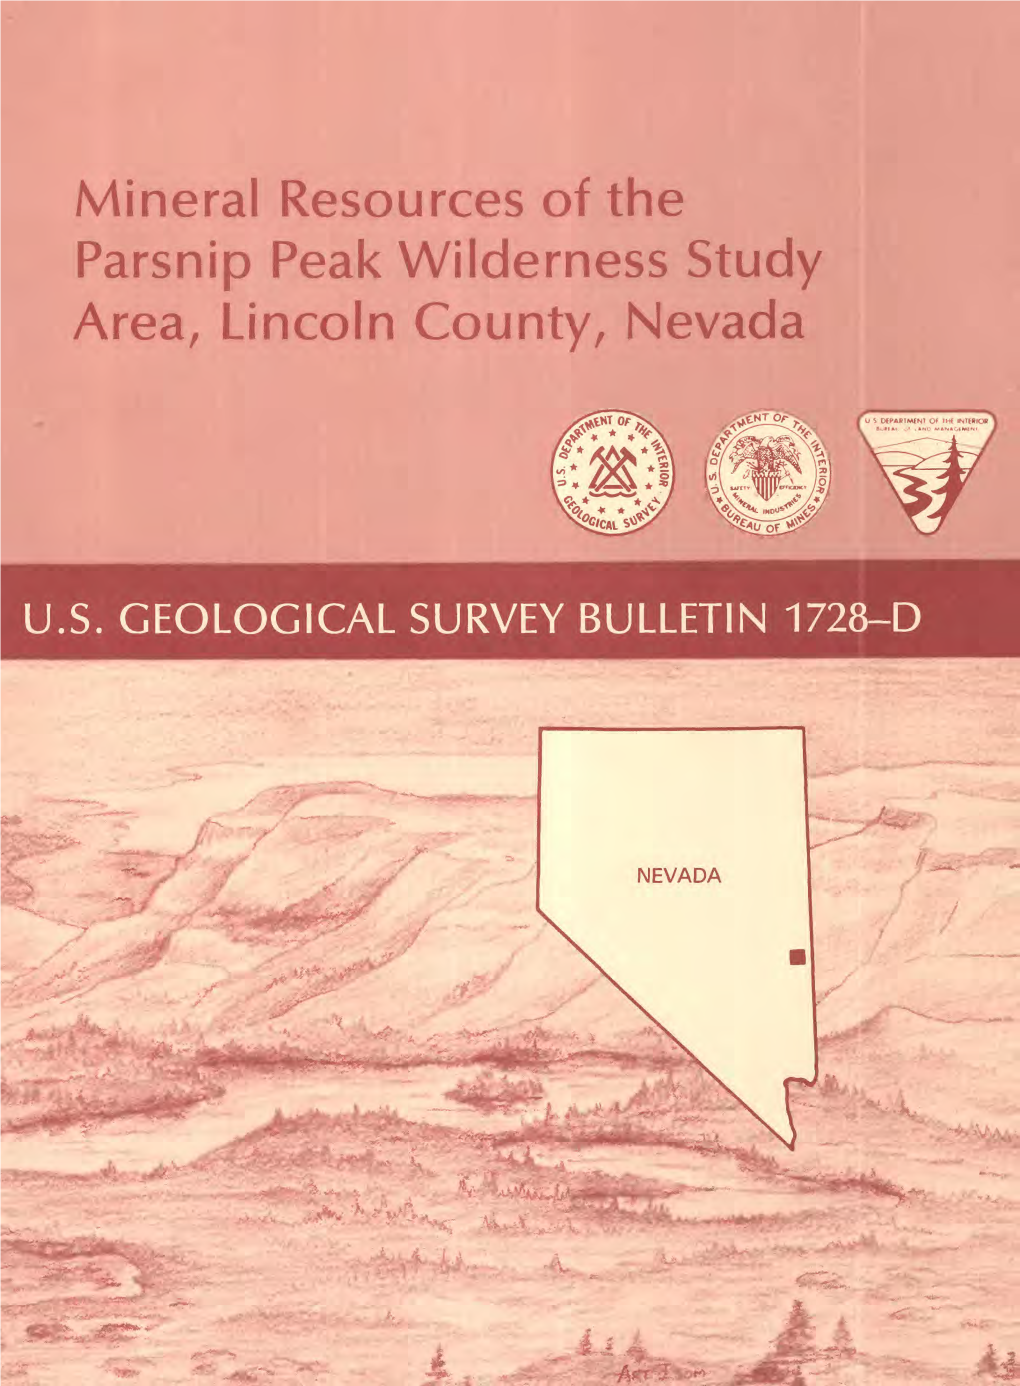 Mineral Resources of the Parsnip Peak Wilderness Study Area, Lincoln County, Nevada